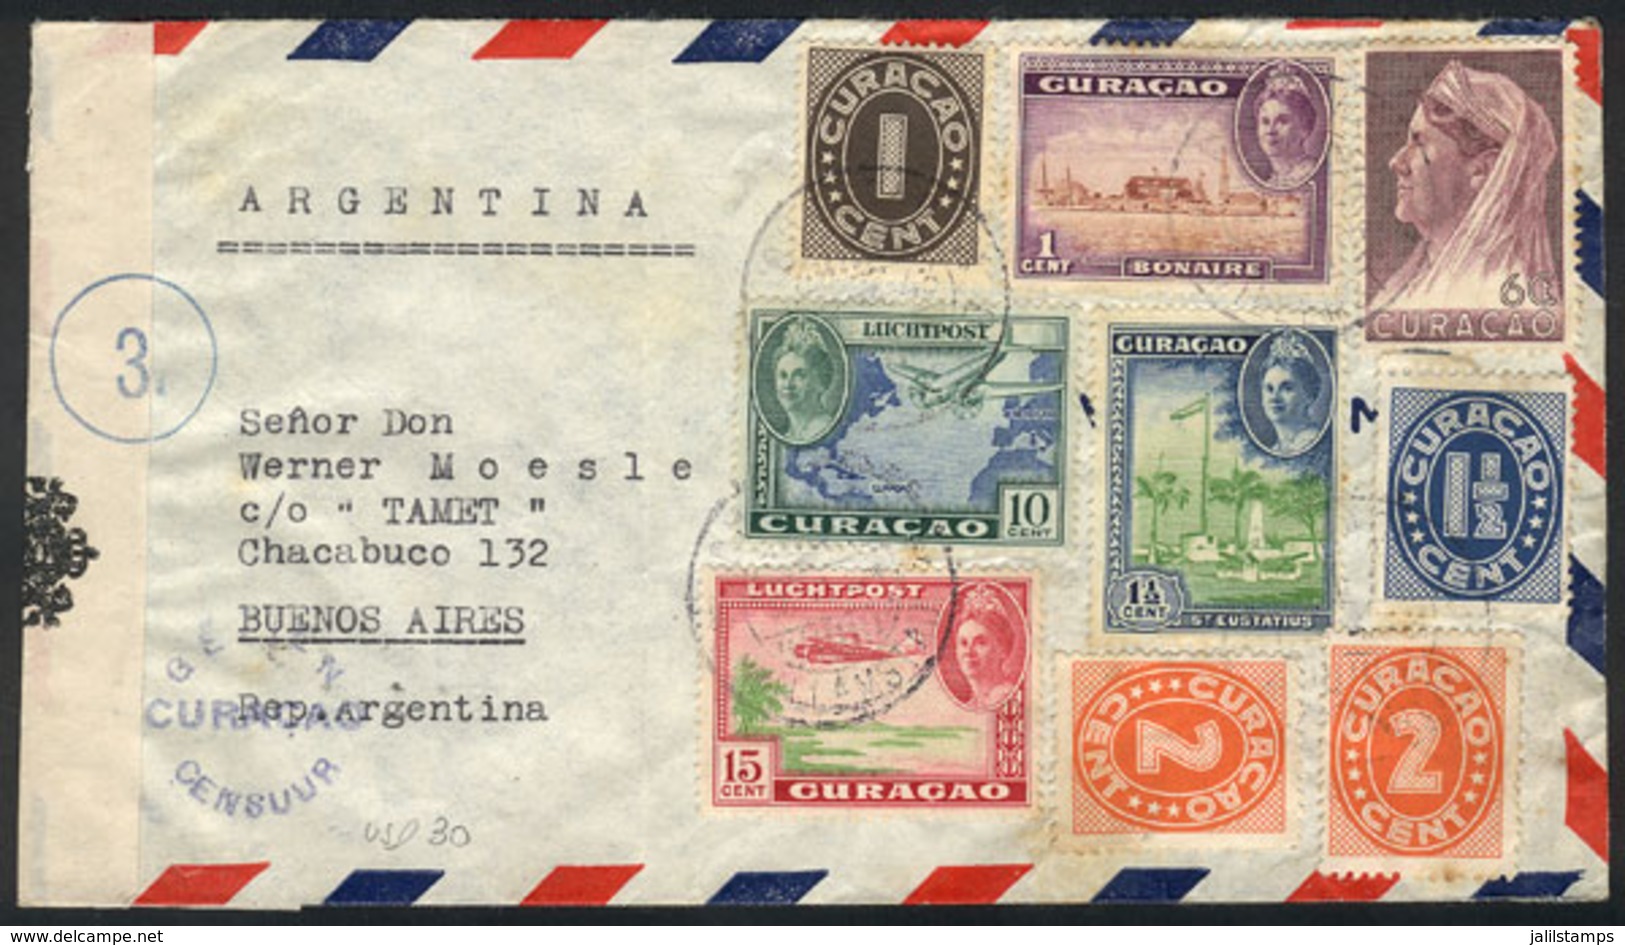 CURACAO: Airmail Cover Sent To Buenos Aires On 9/AP/1943 With Nice Multicolored Postage Of 40c. (9 Stamps) And Censored, - Niederländische Antillen, Curaçao, Aruba